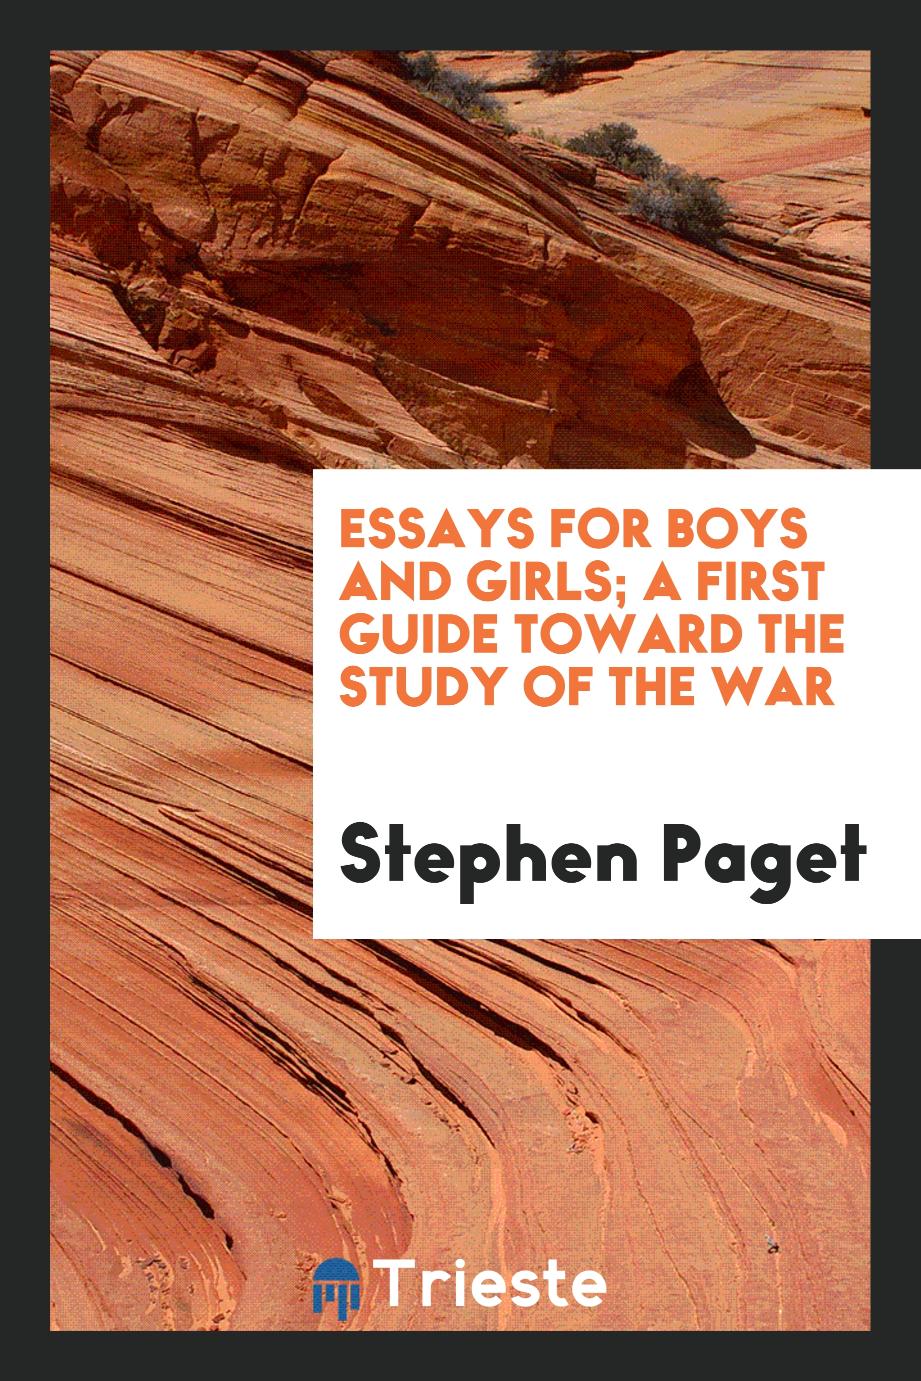 Essays for boys and girls; a first guide toward the study of the war